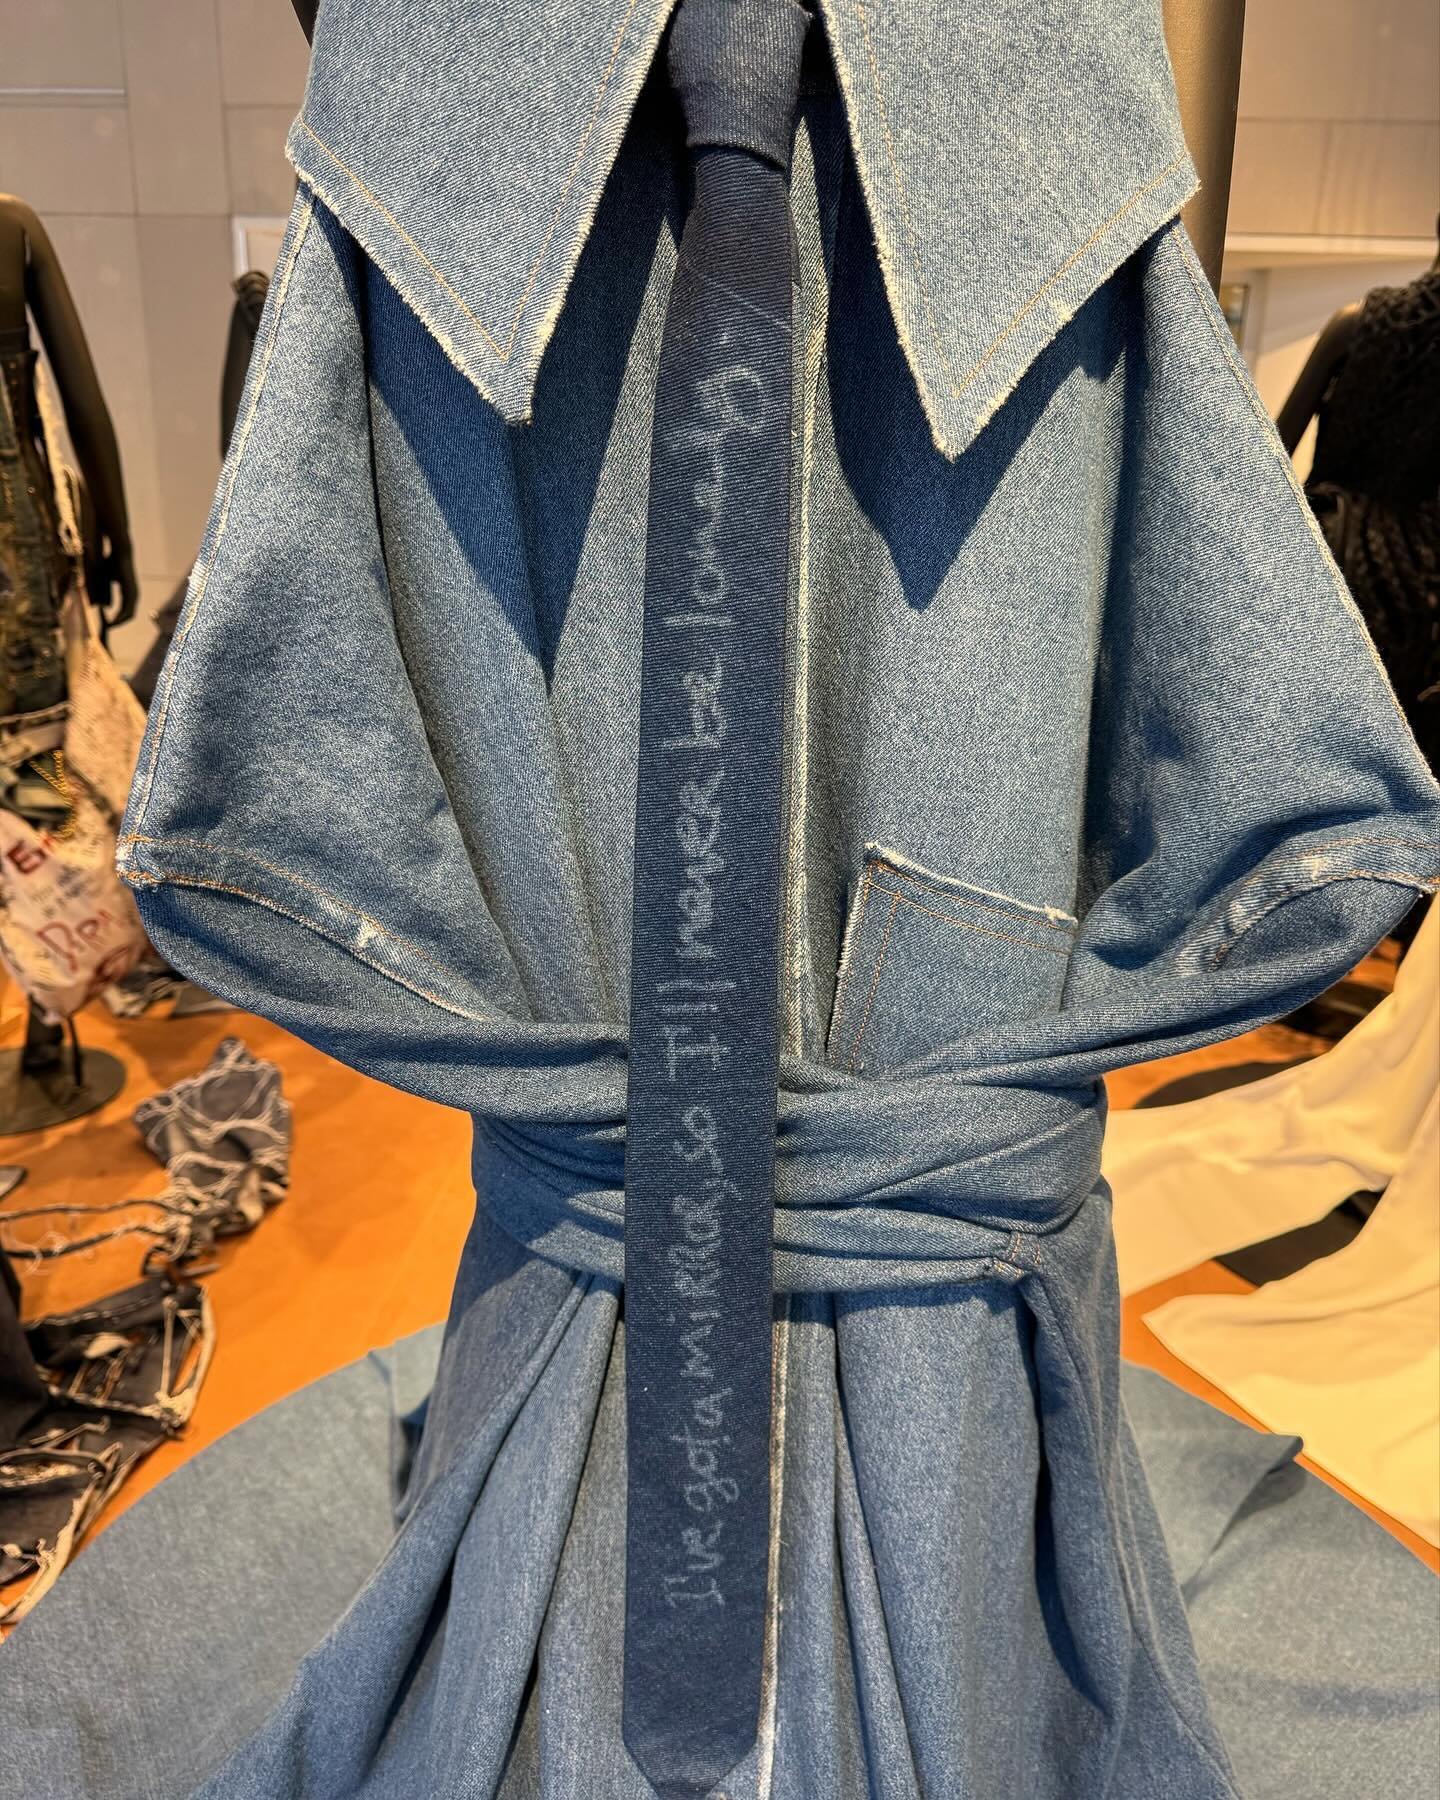 Art &amp; Fashion exhibitions are so important to me: they inspire and stimulate our creativity. 

Take a look at the work of FIT Fashion Design students: They were asked to create an outfit just using denim. It&rsquo;s amazing what they did! 

I got